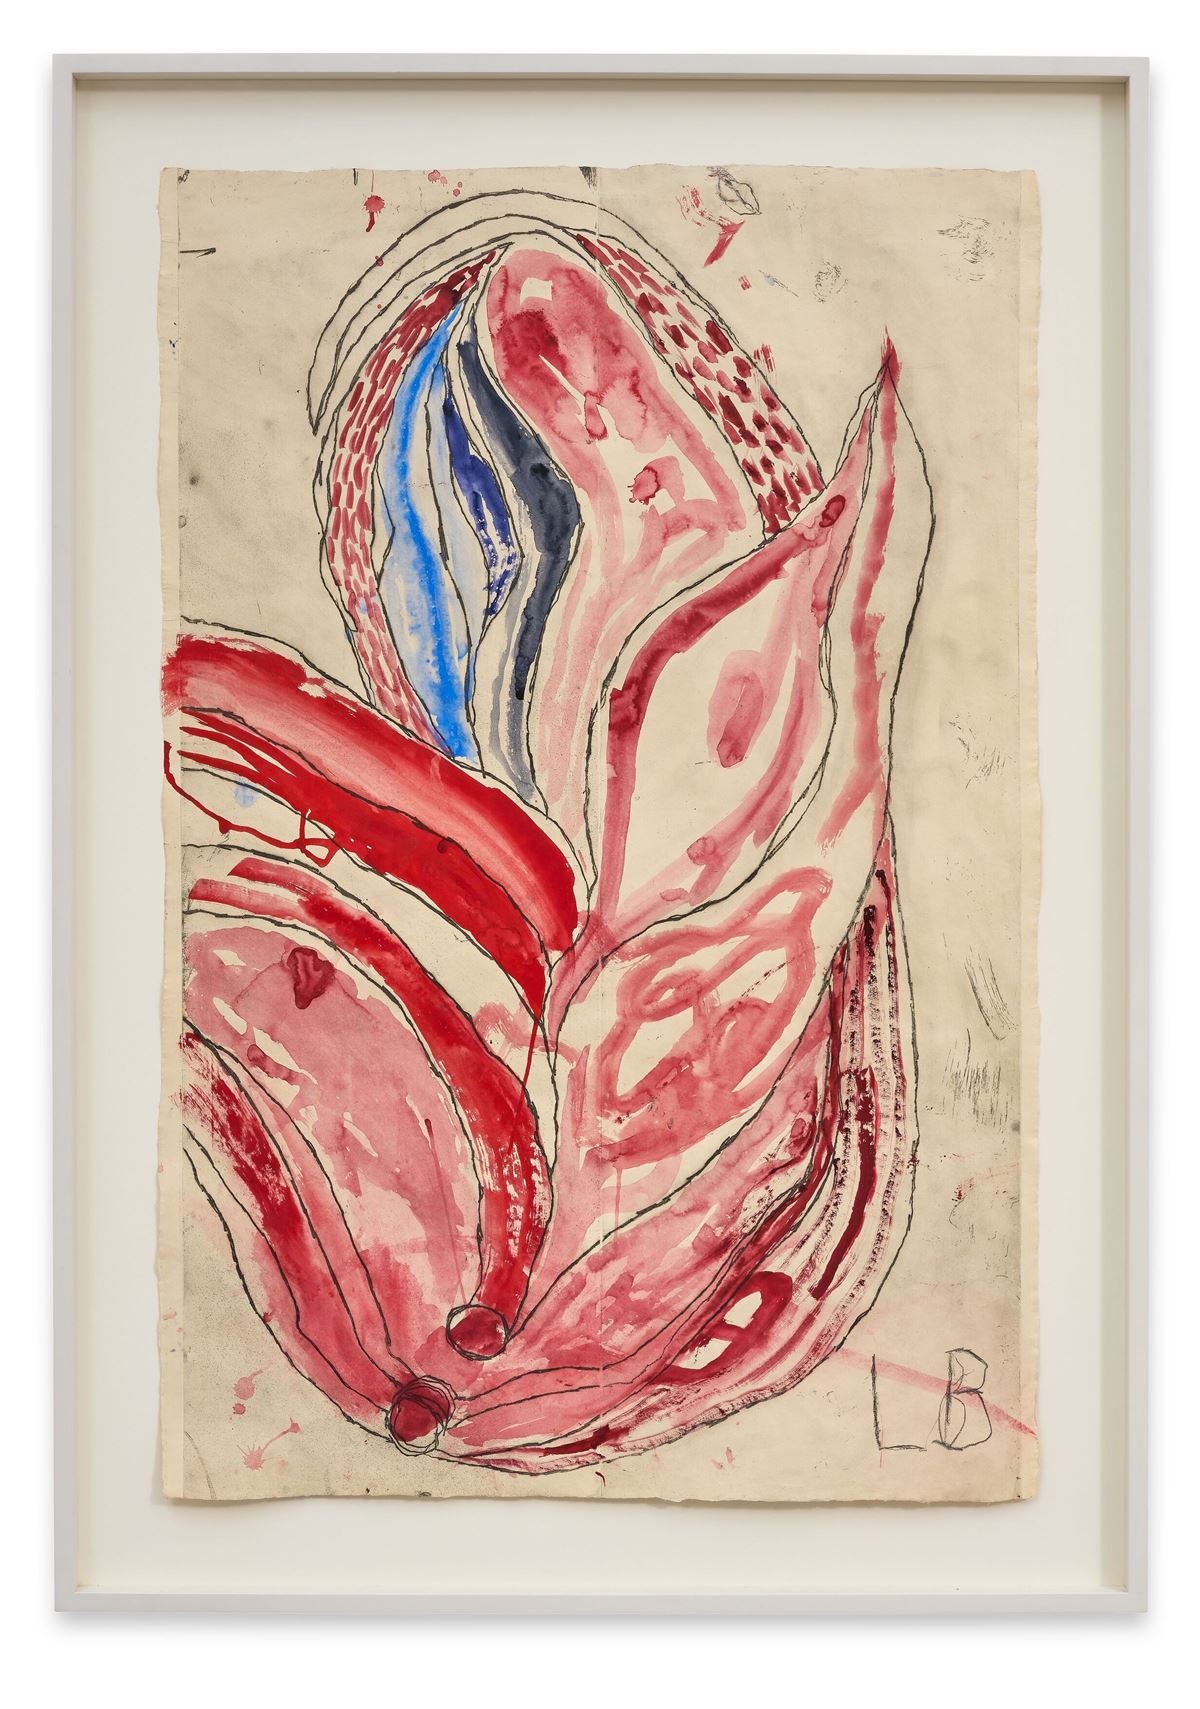 Louise Bourgeois. Self Portrait - Hauser & Wirth